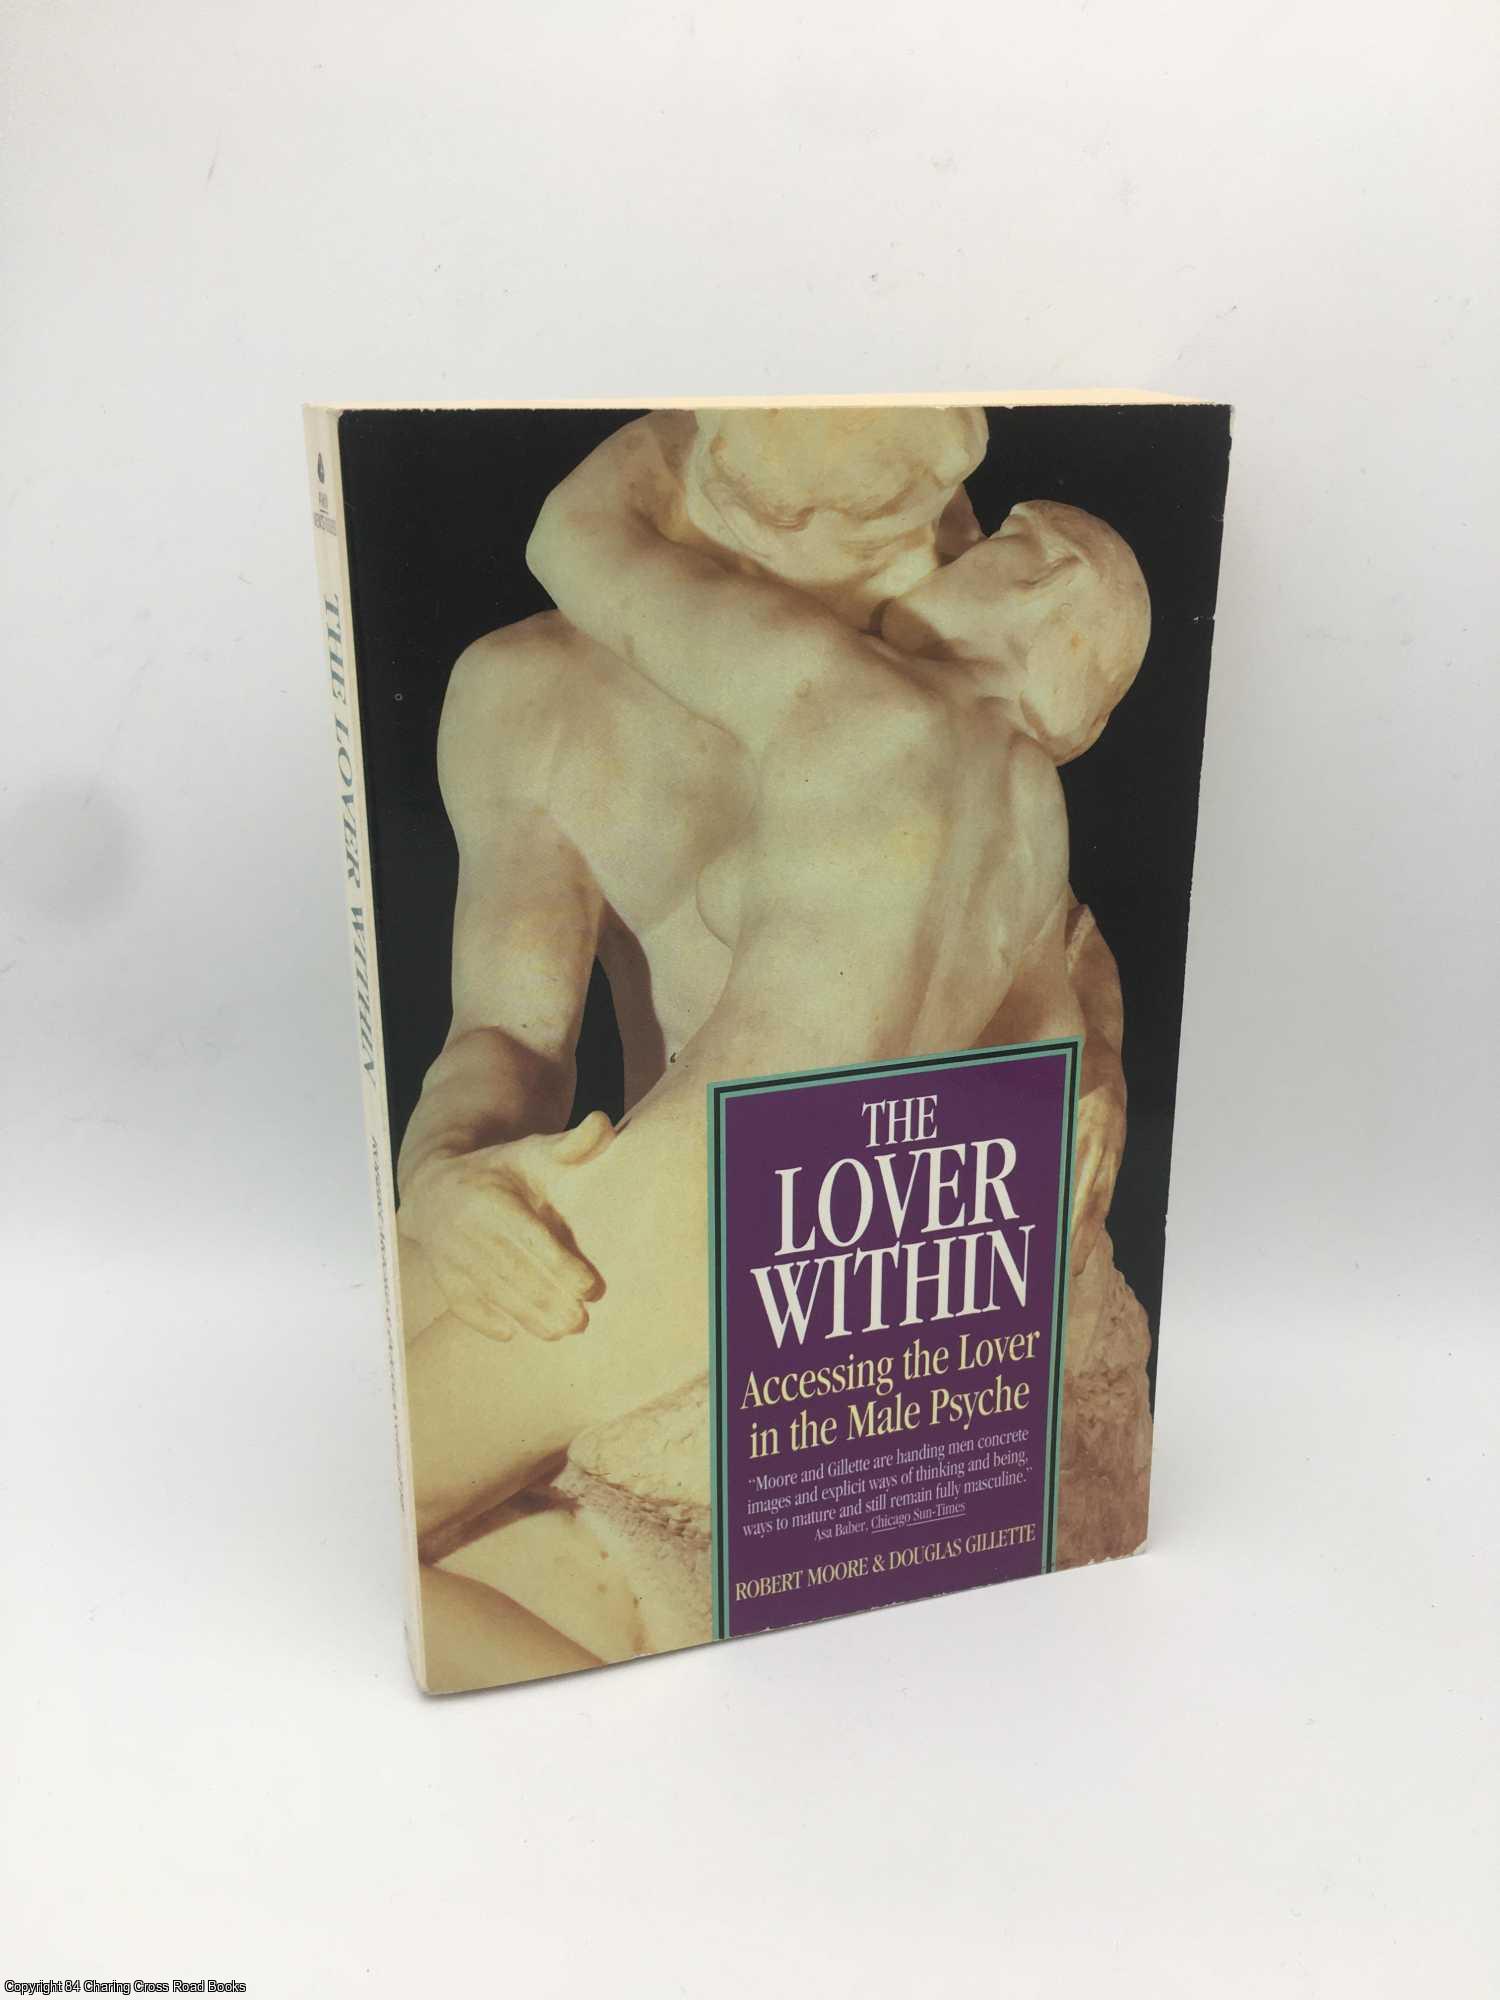 Moore, Robert; Gillette - Lover Within: Accessing the Lover in the Male Psyche